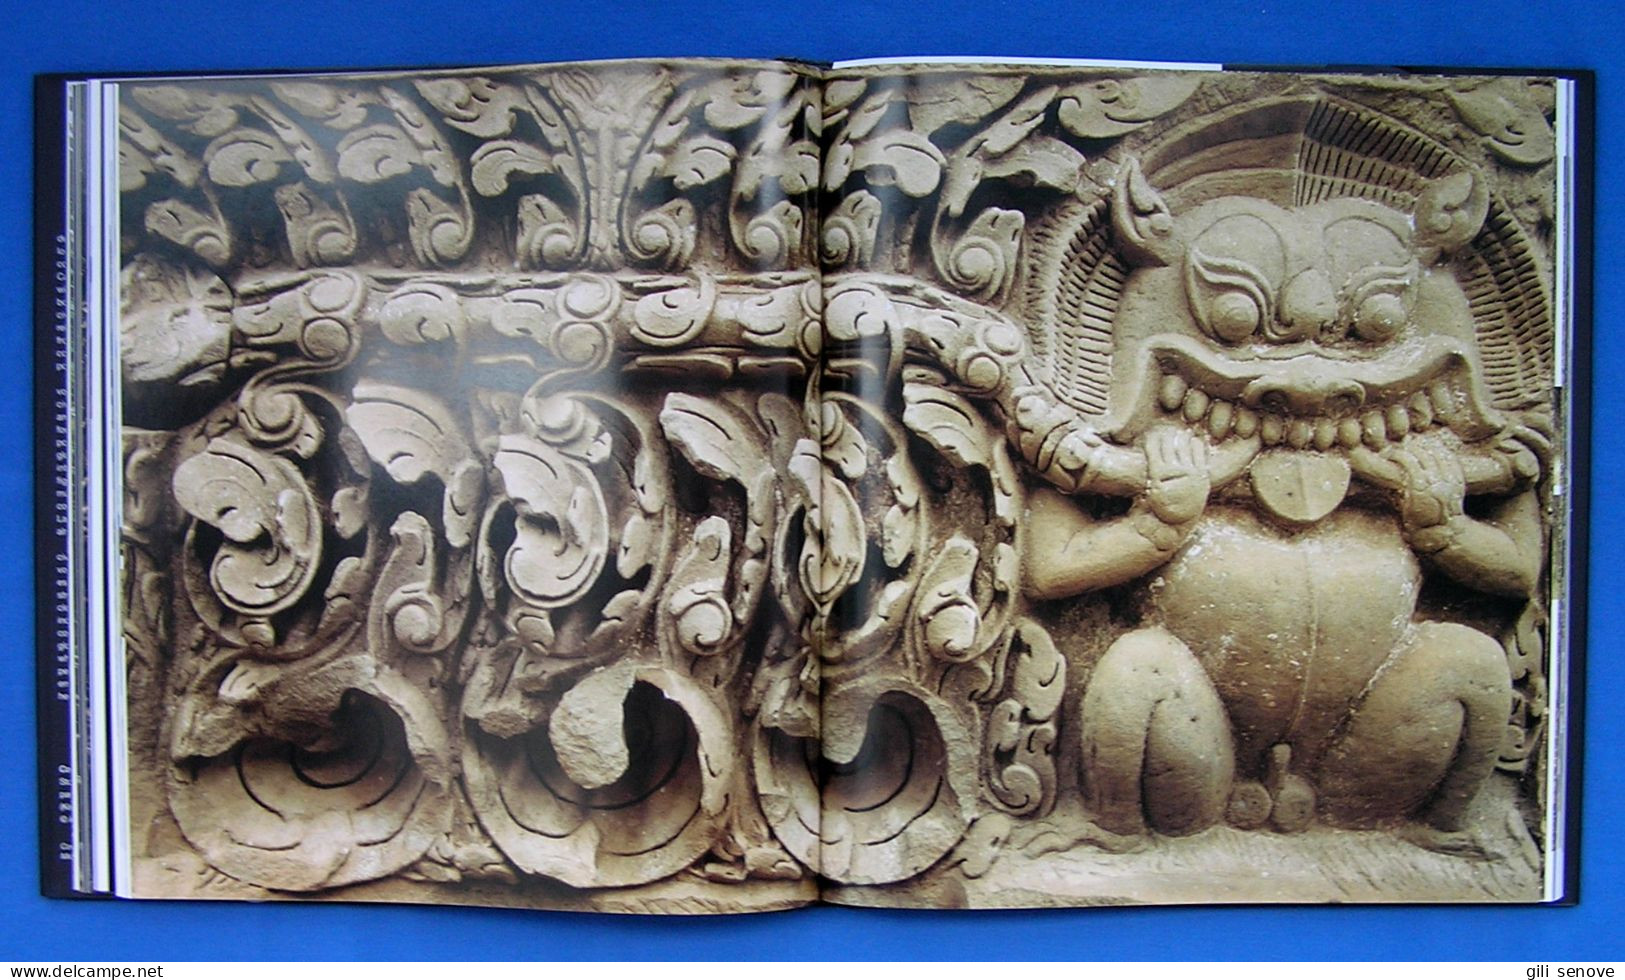 The Khmers: History and Treasures of an Ancient Civilization 2007